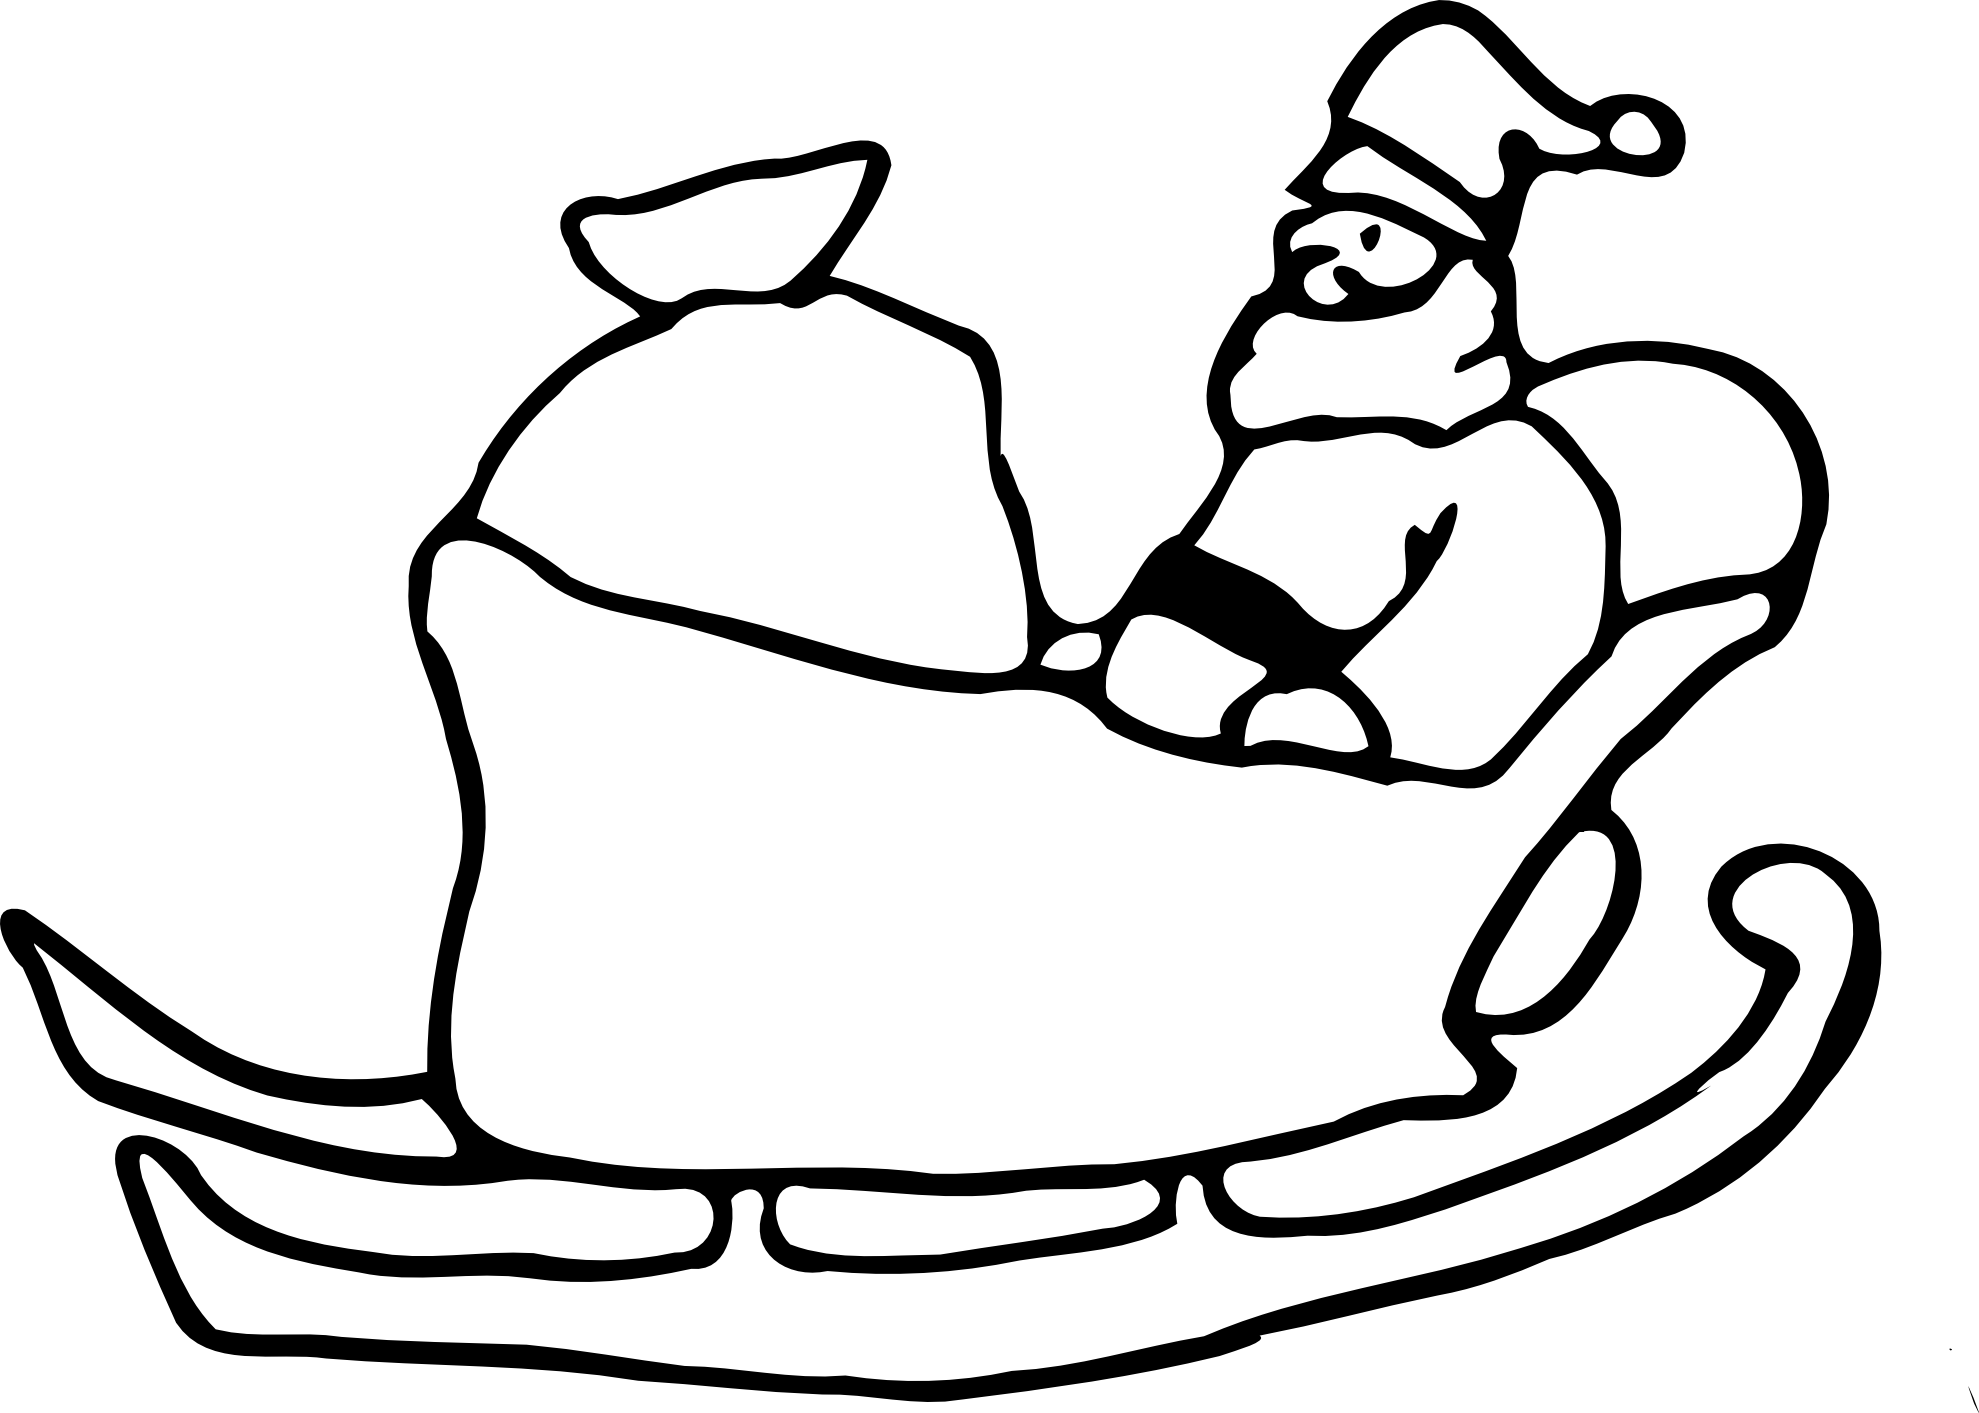 Santa And Reindeer Clipart Black And White - Santa On His Sleigh (1979x1413)